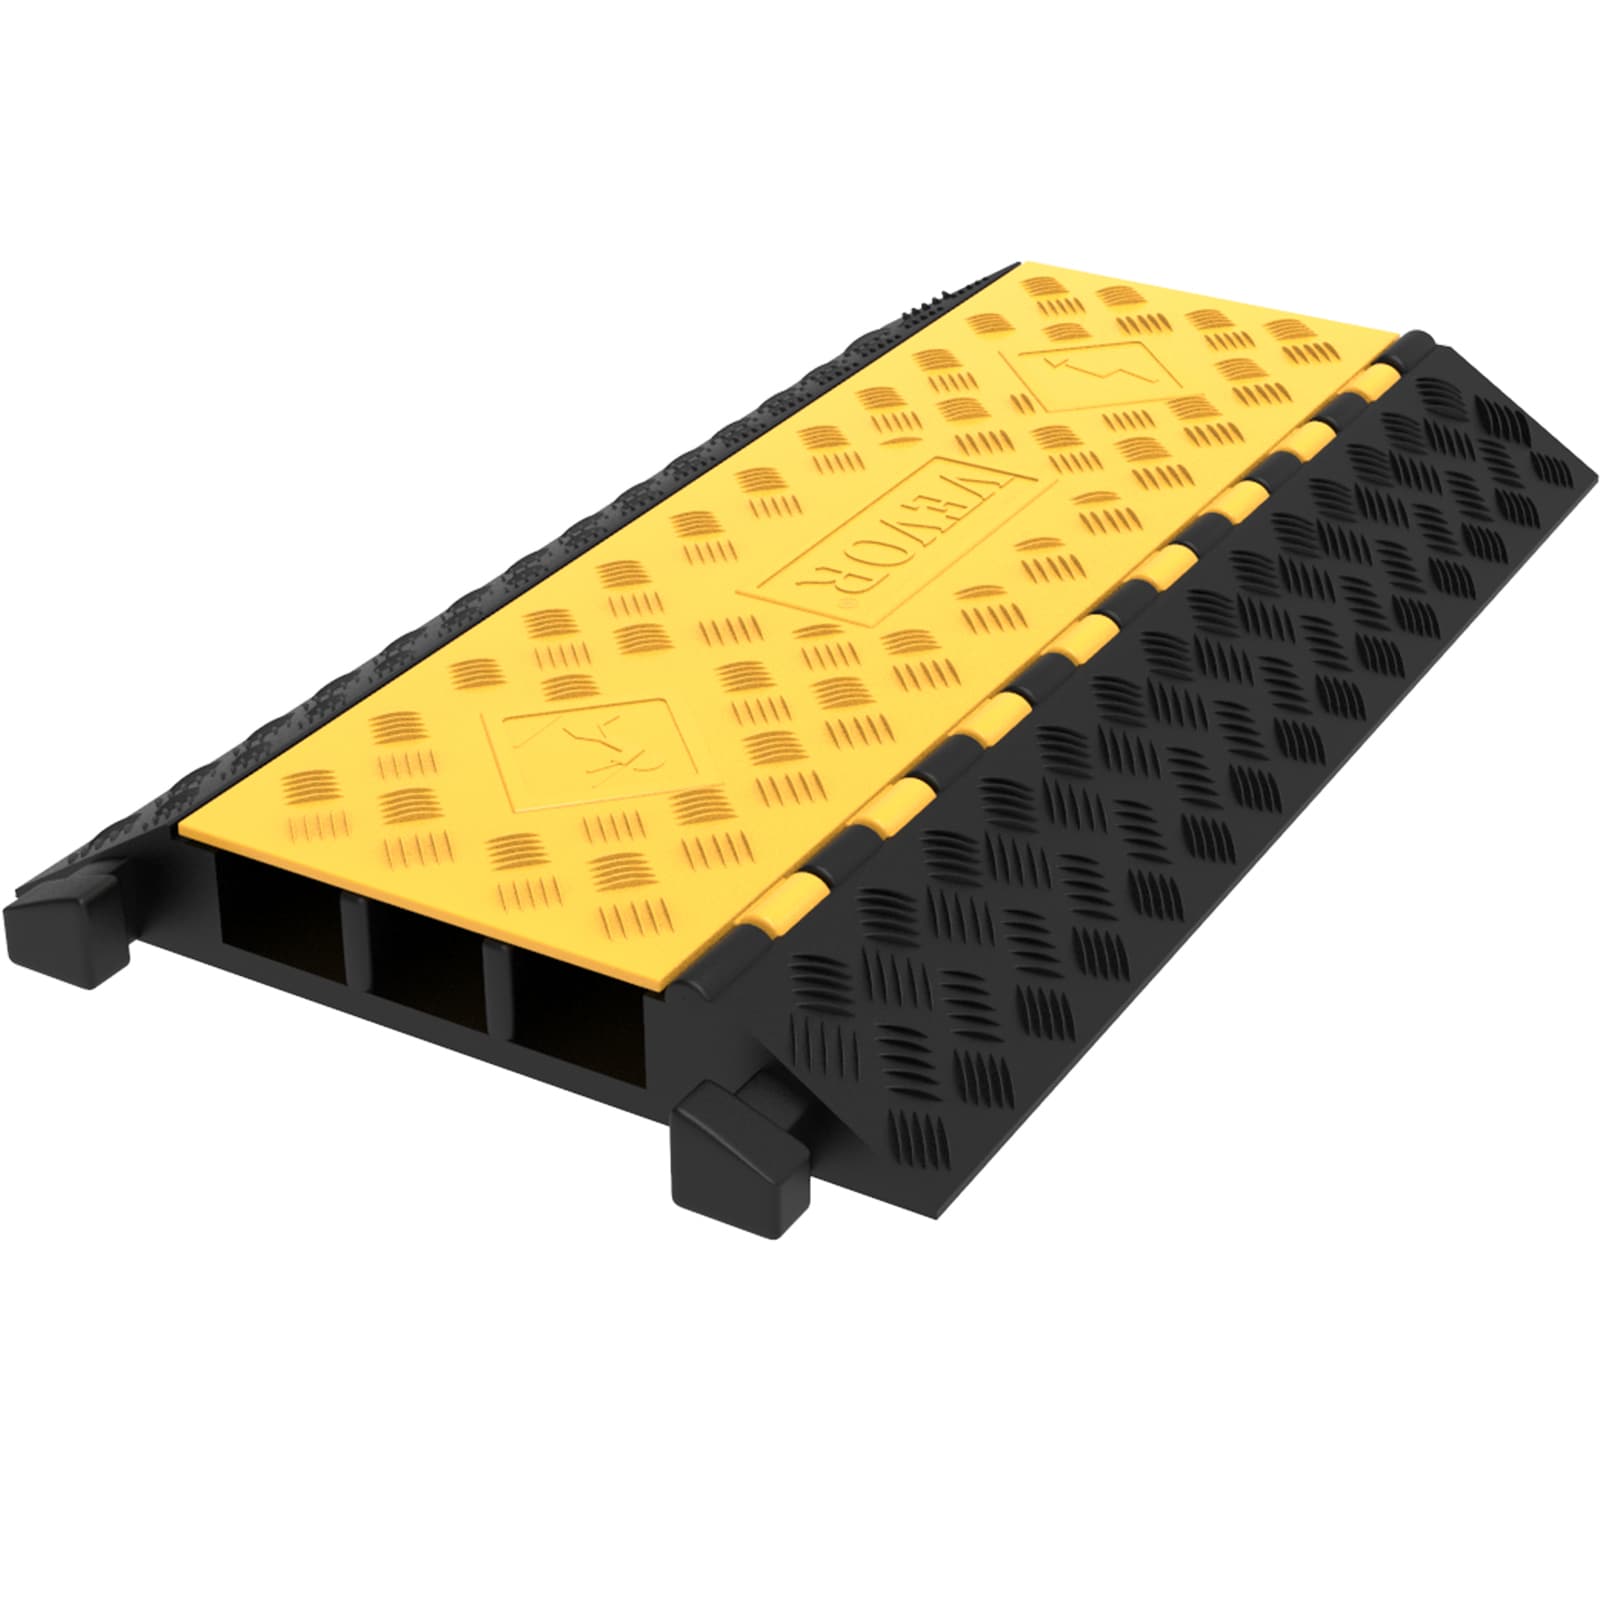 Cable Raceway Cover, Pvc Floor Cord Protector